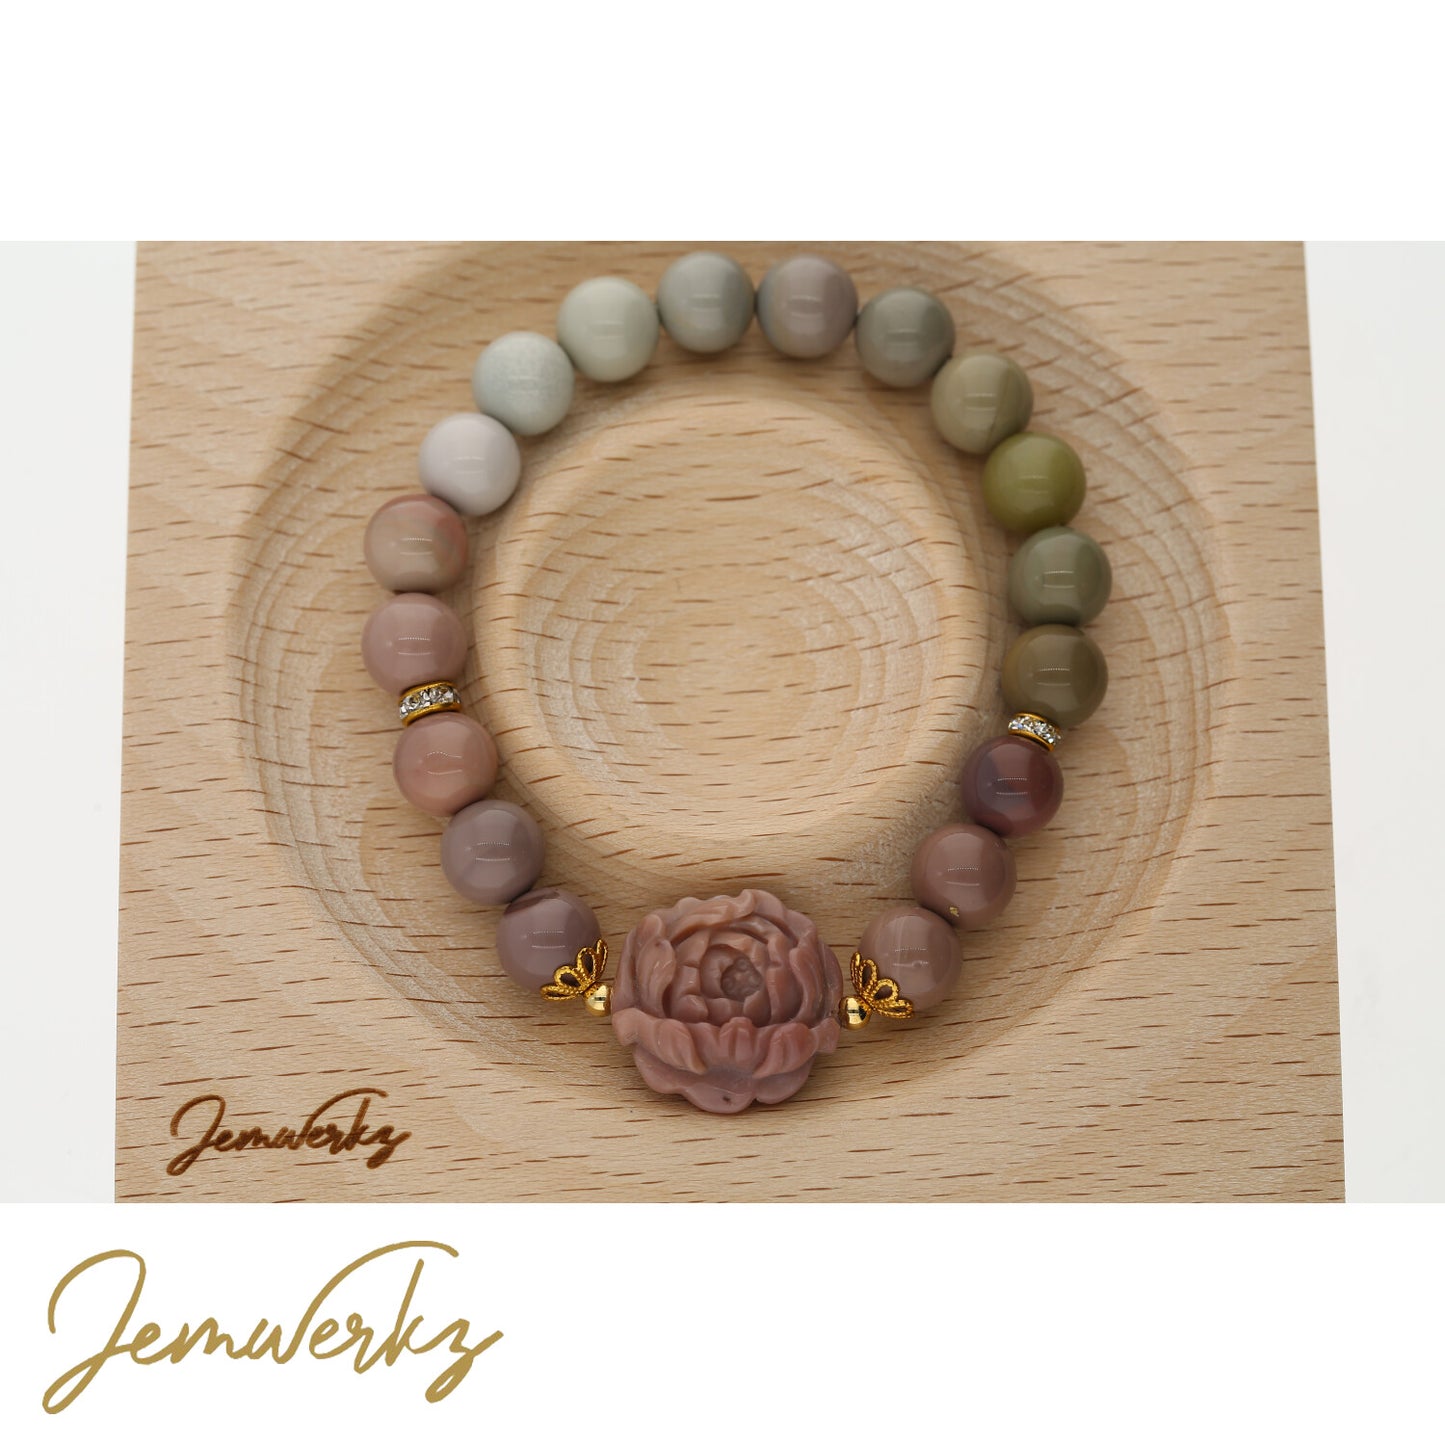 Load image into Gallery viewer, Floral Alashan Agate Bracelet | Alashan Agate Bracelet | Jemwerkz
